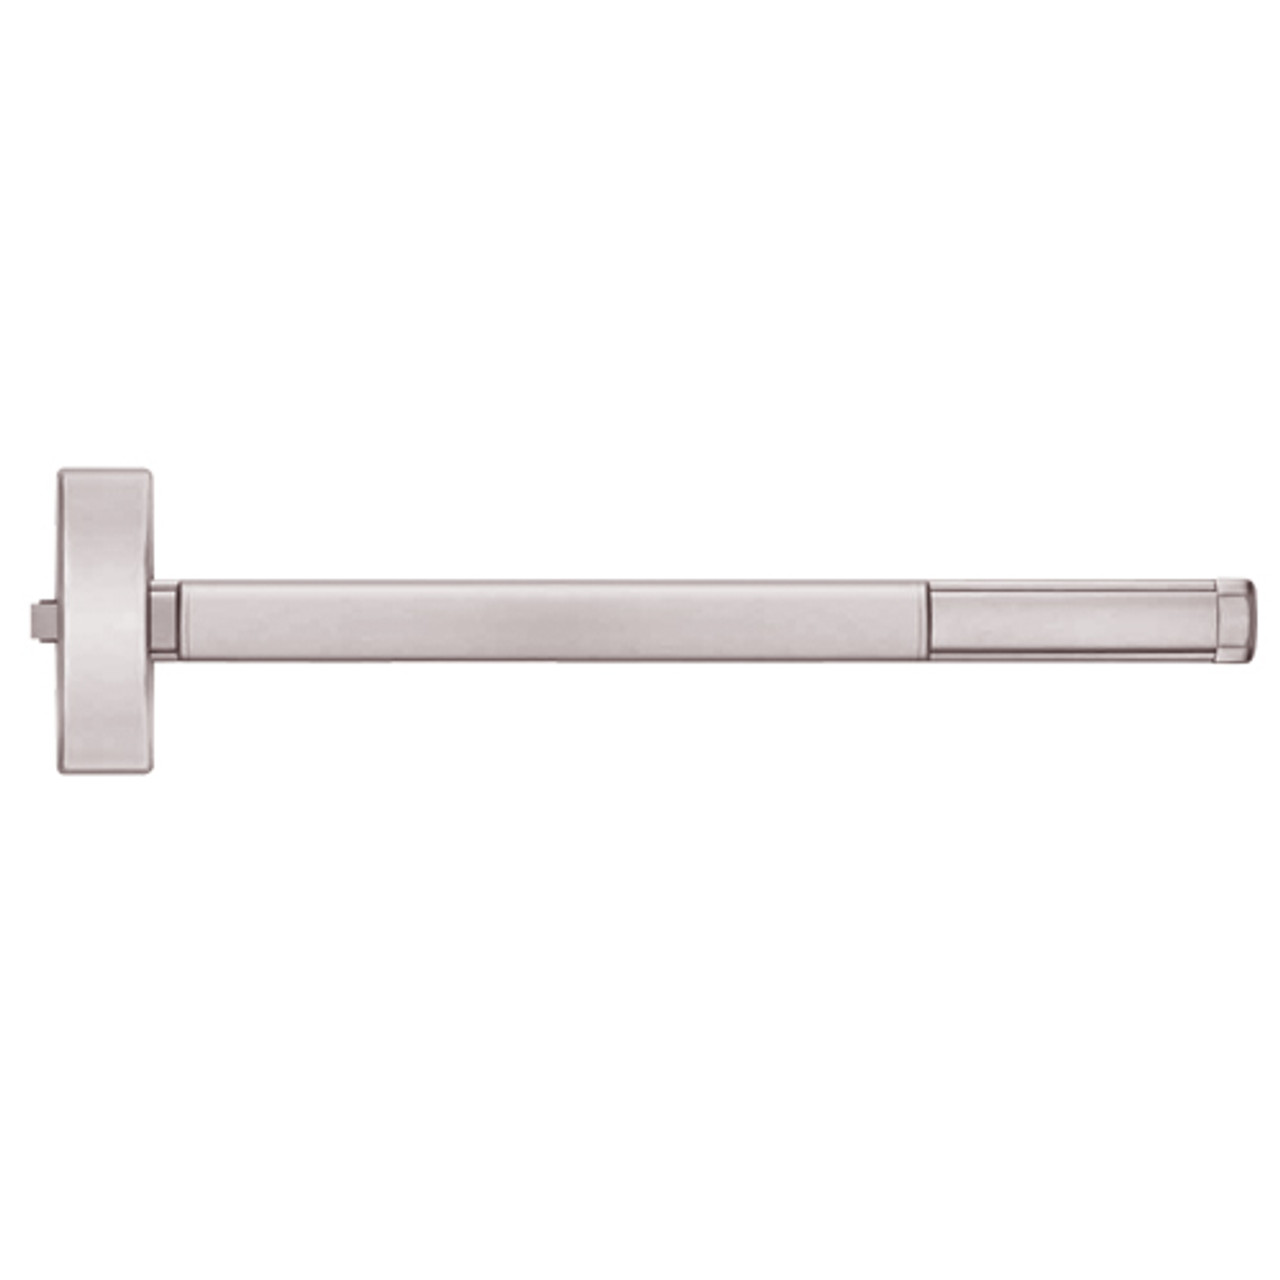 MLR2101-628-36 PHI 2100 Series Non Fire Rated Apex Rim Exit Device with Motorized Latch Retraction Prepped for Cover Plate in Satin Aluminum Finish